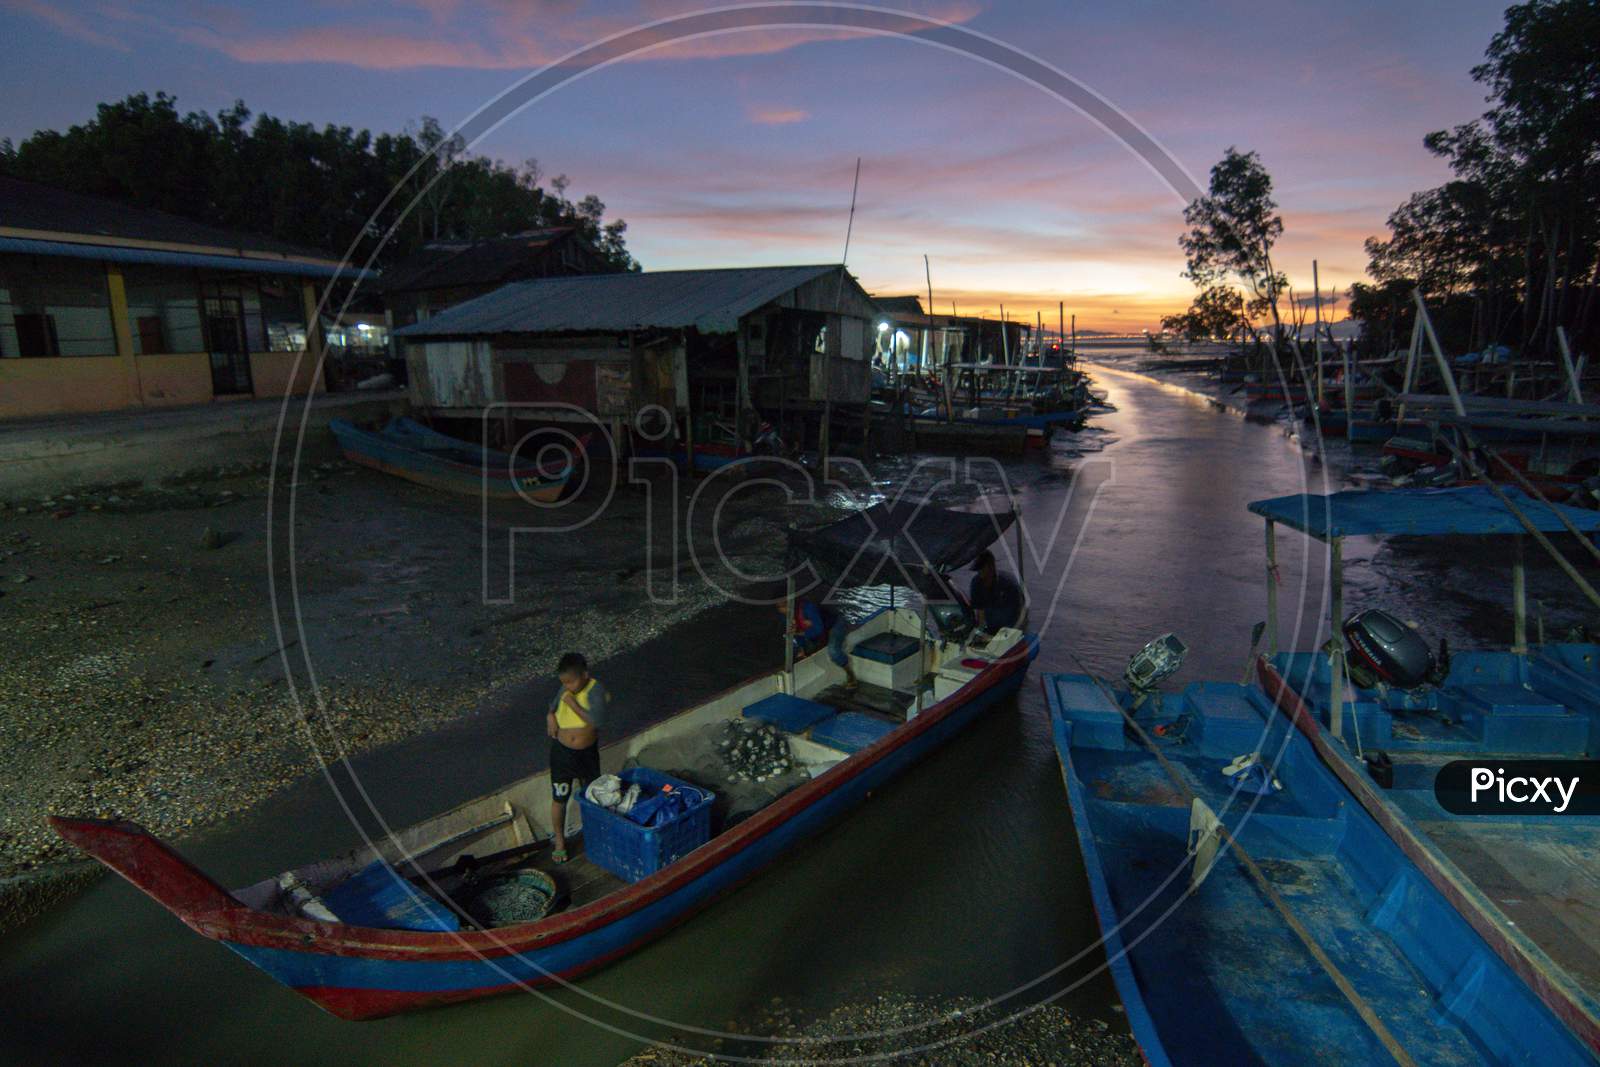 A Local Fisherman Back From Sea During Dusk Hour